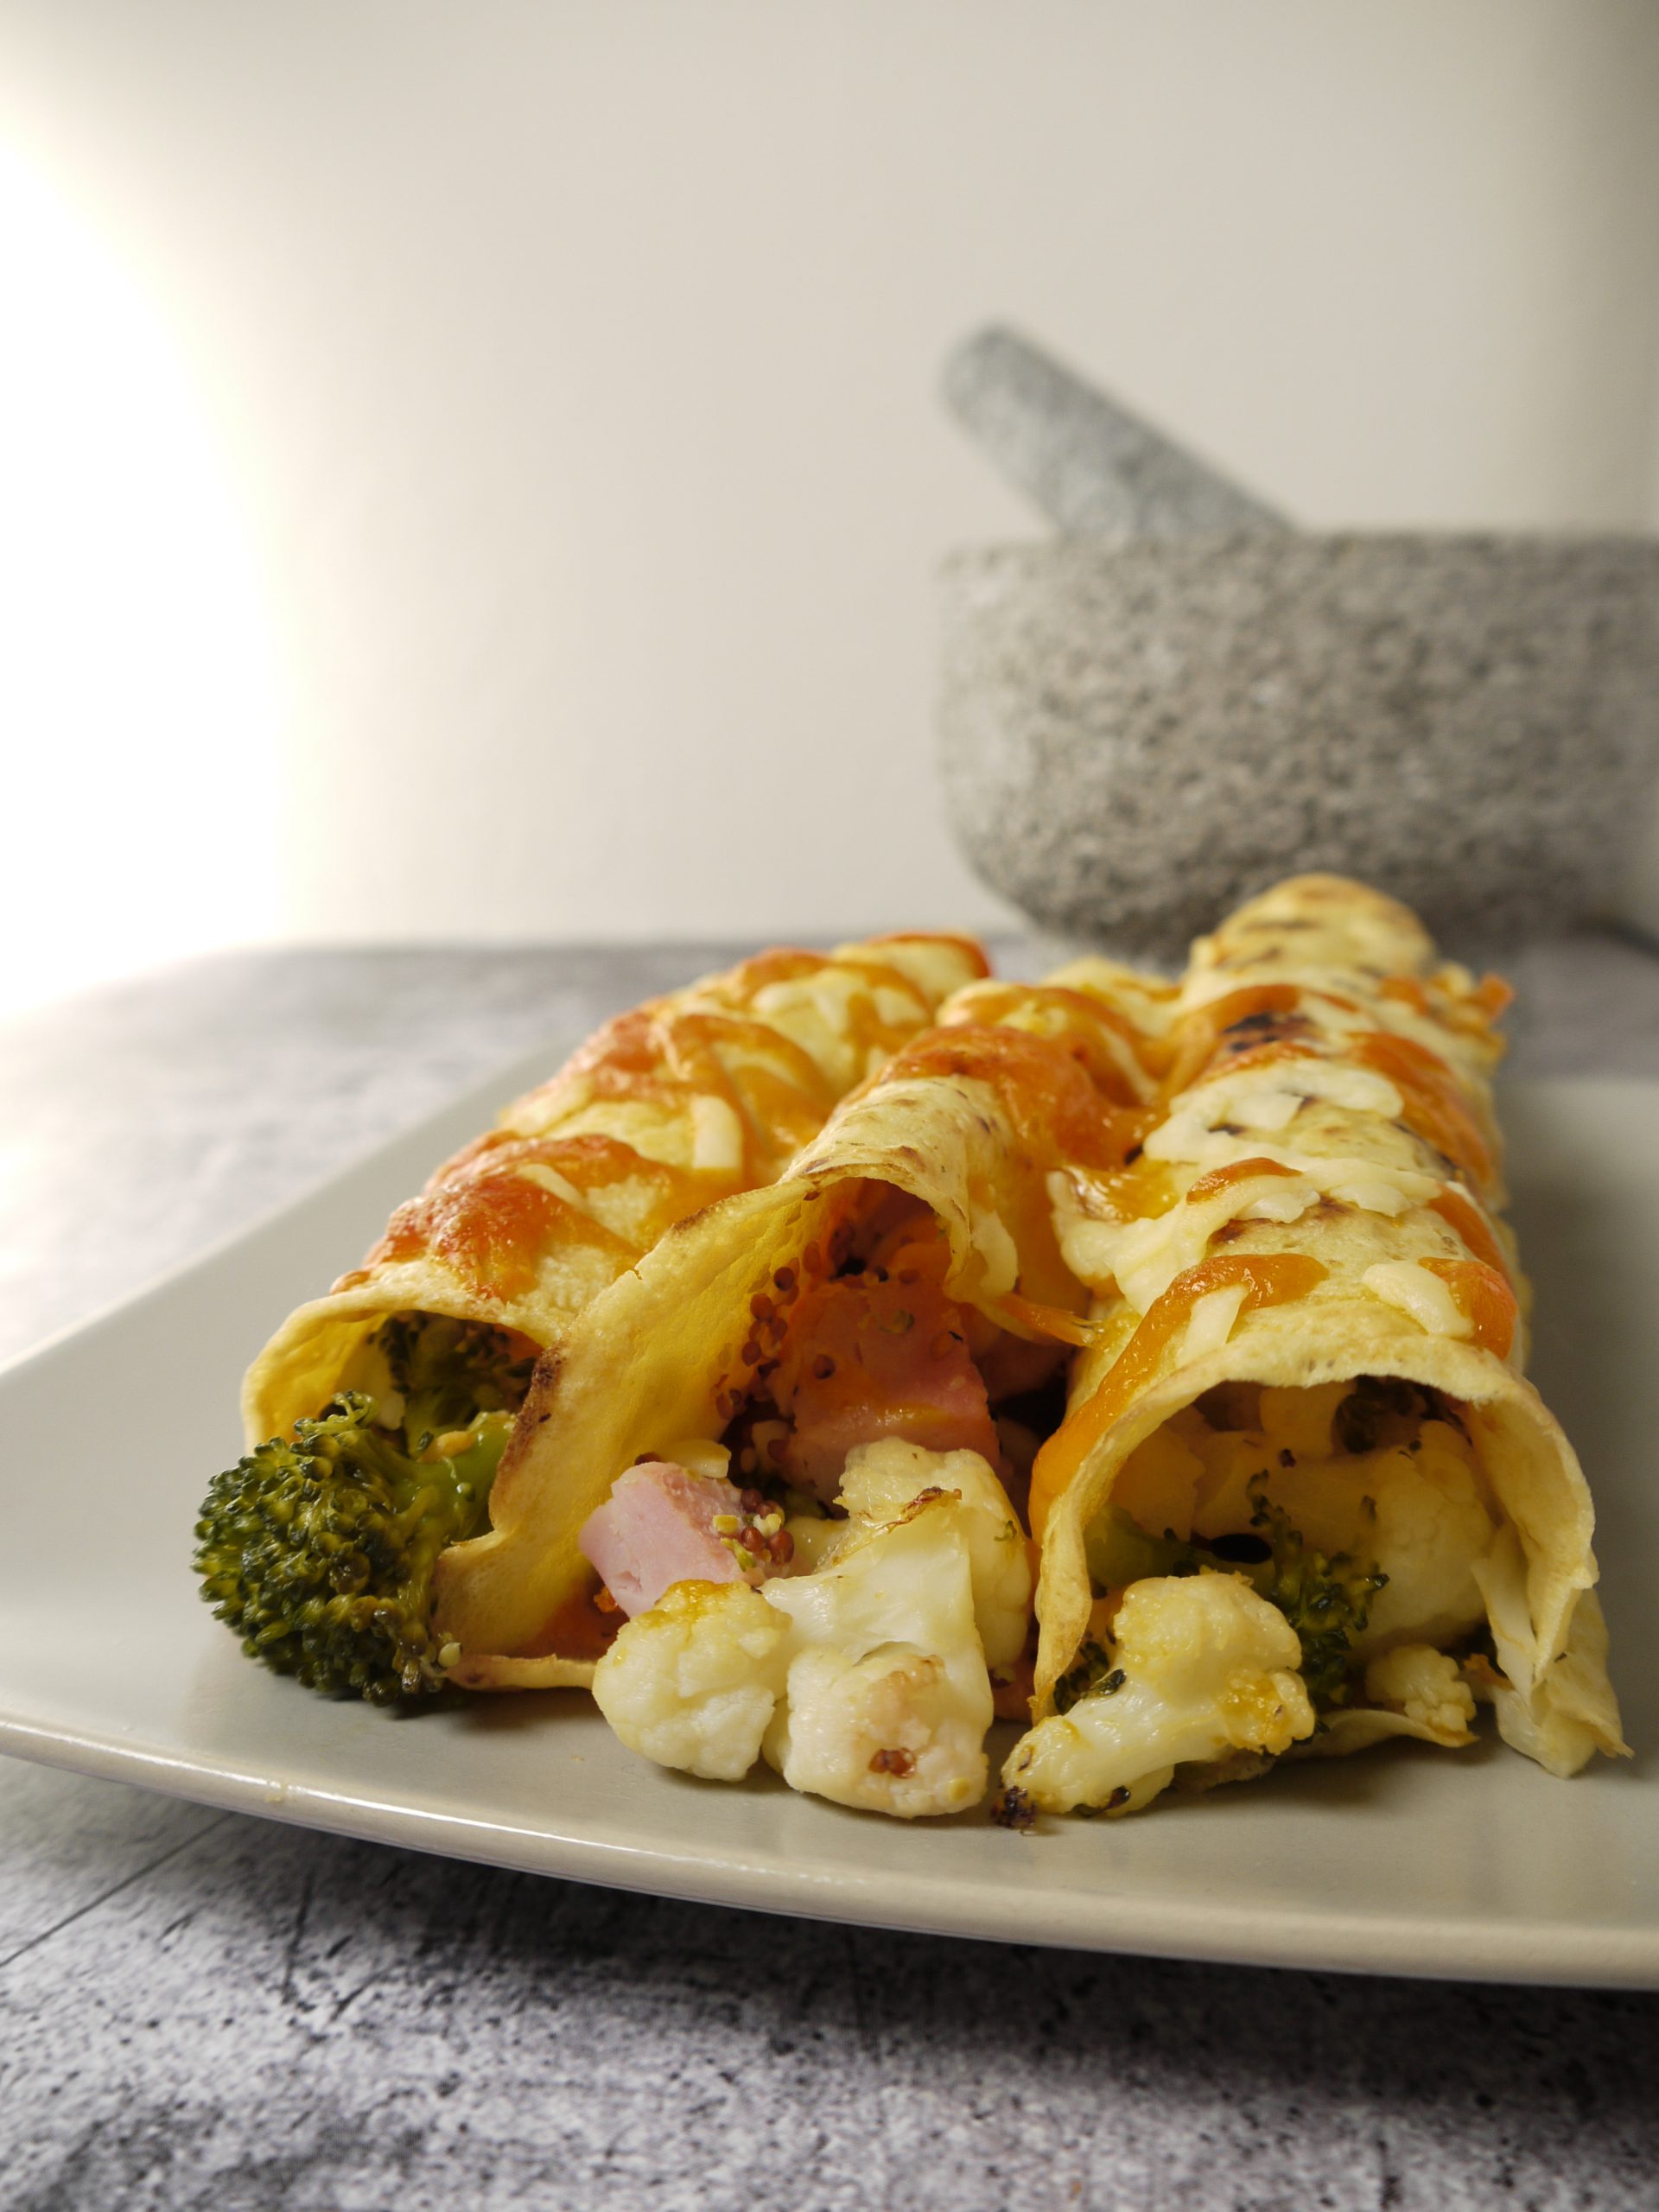 What to do with leftover pressure cooked gammon or ham recipes make Ham, Cauliflower and Broccoli Crepes from Leftovers by Design